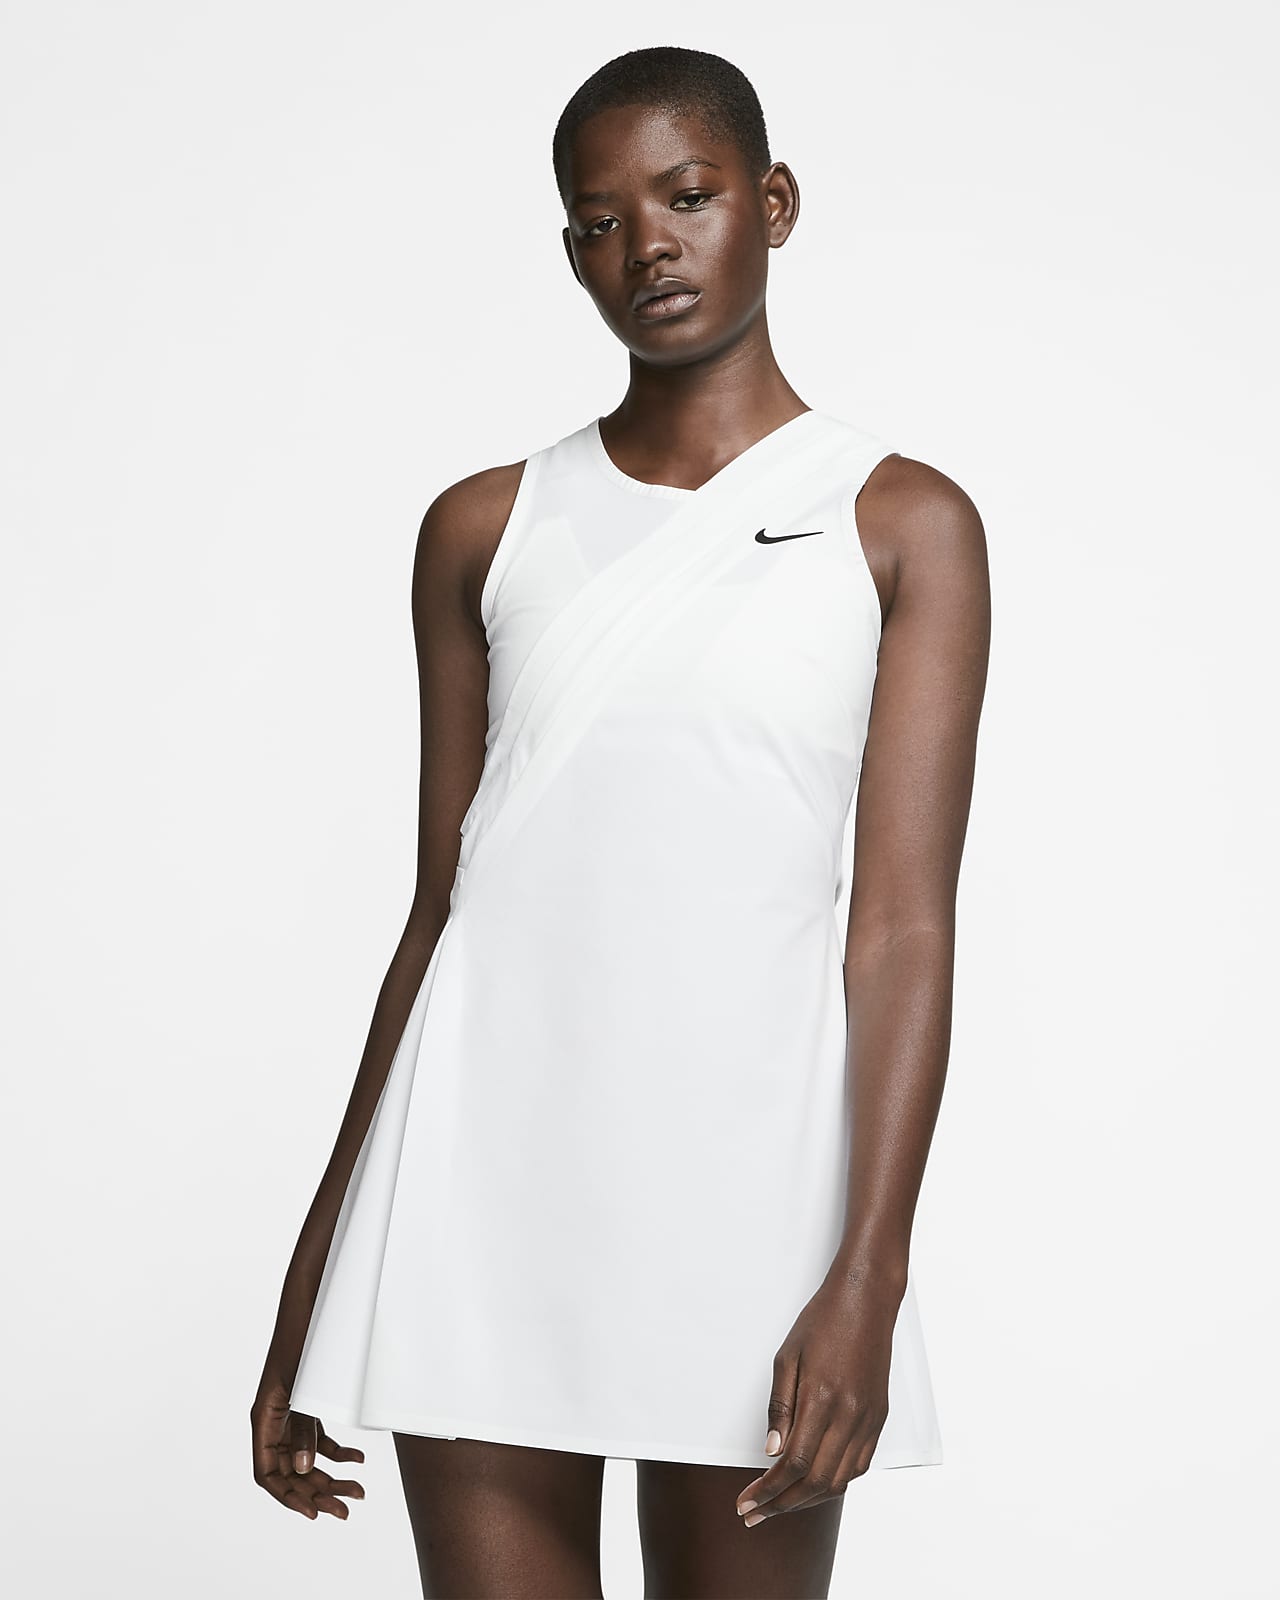 dress with tennis